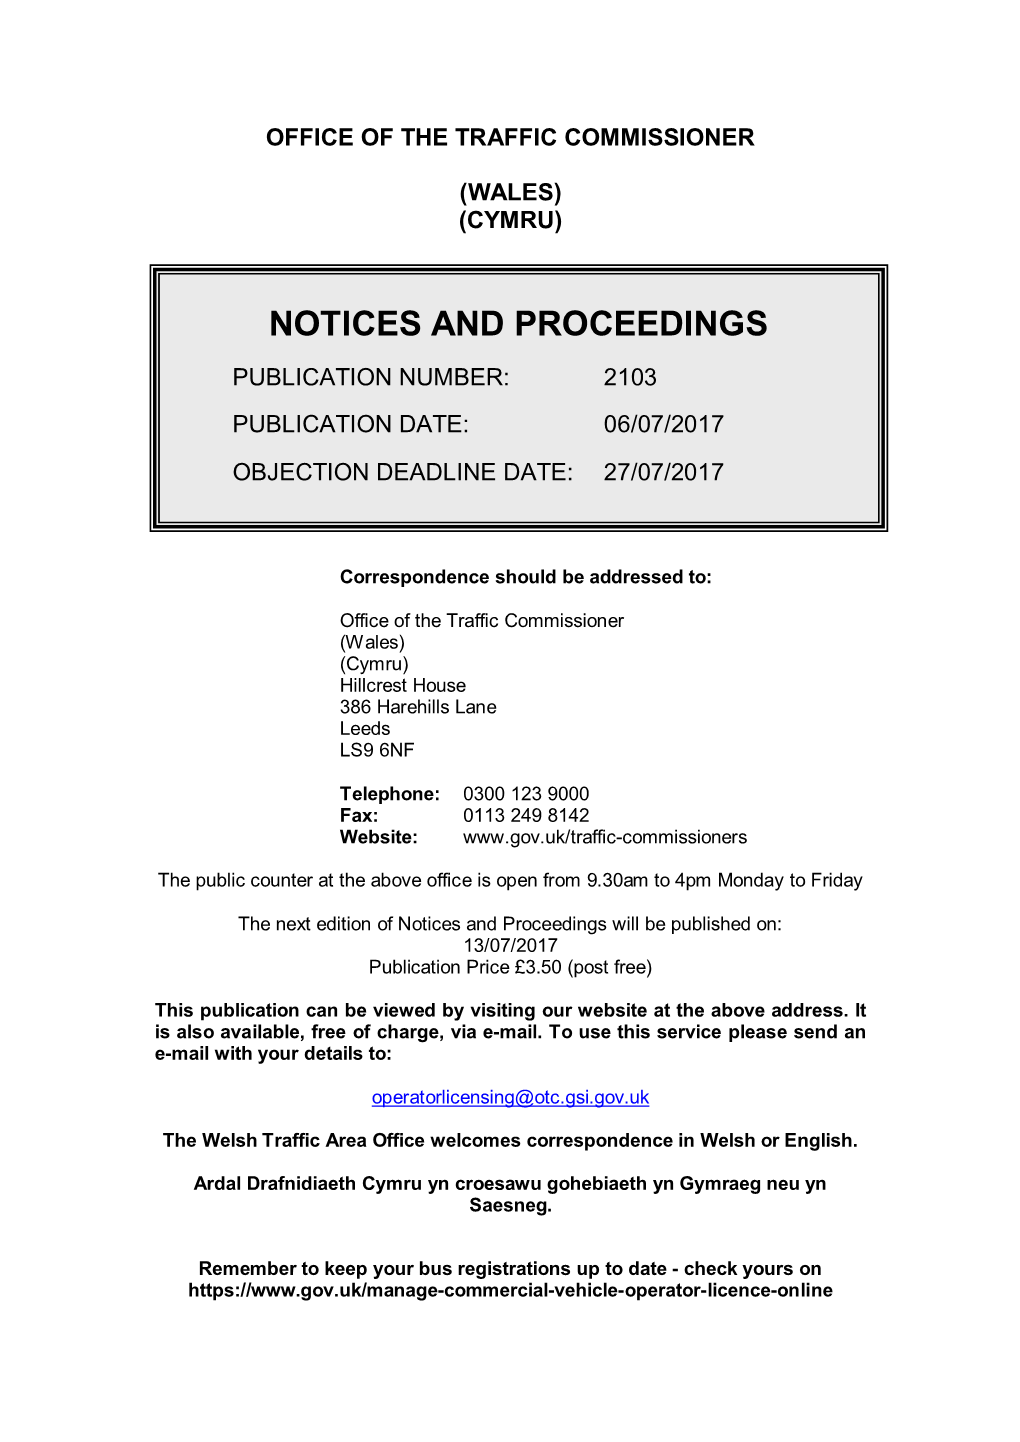 Notices and Proceedings 2103: Office of the Traffic Commissioner, Wales